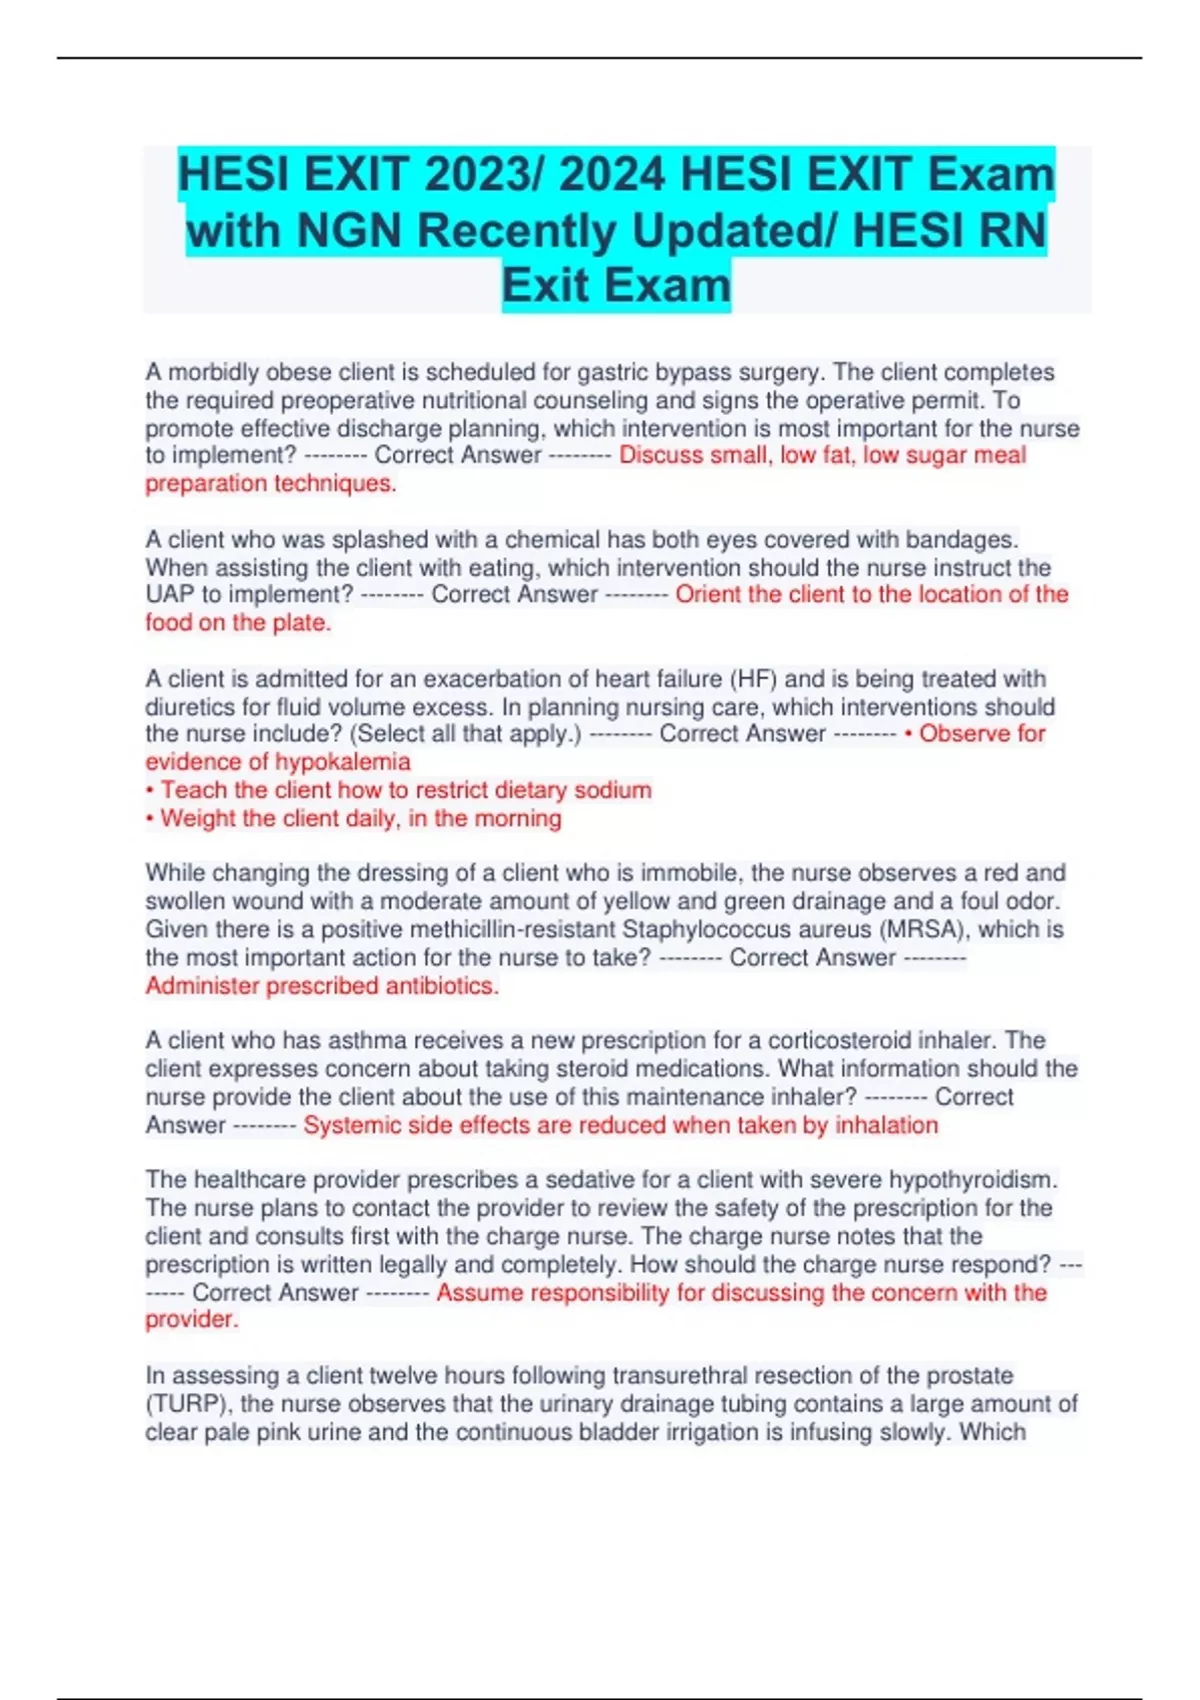 HESI EXIT 2023/ 2024 HESI EXIT Exam with NGN Recently Updated/ HESI RN